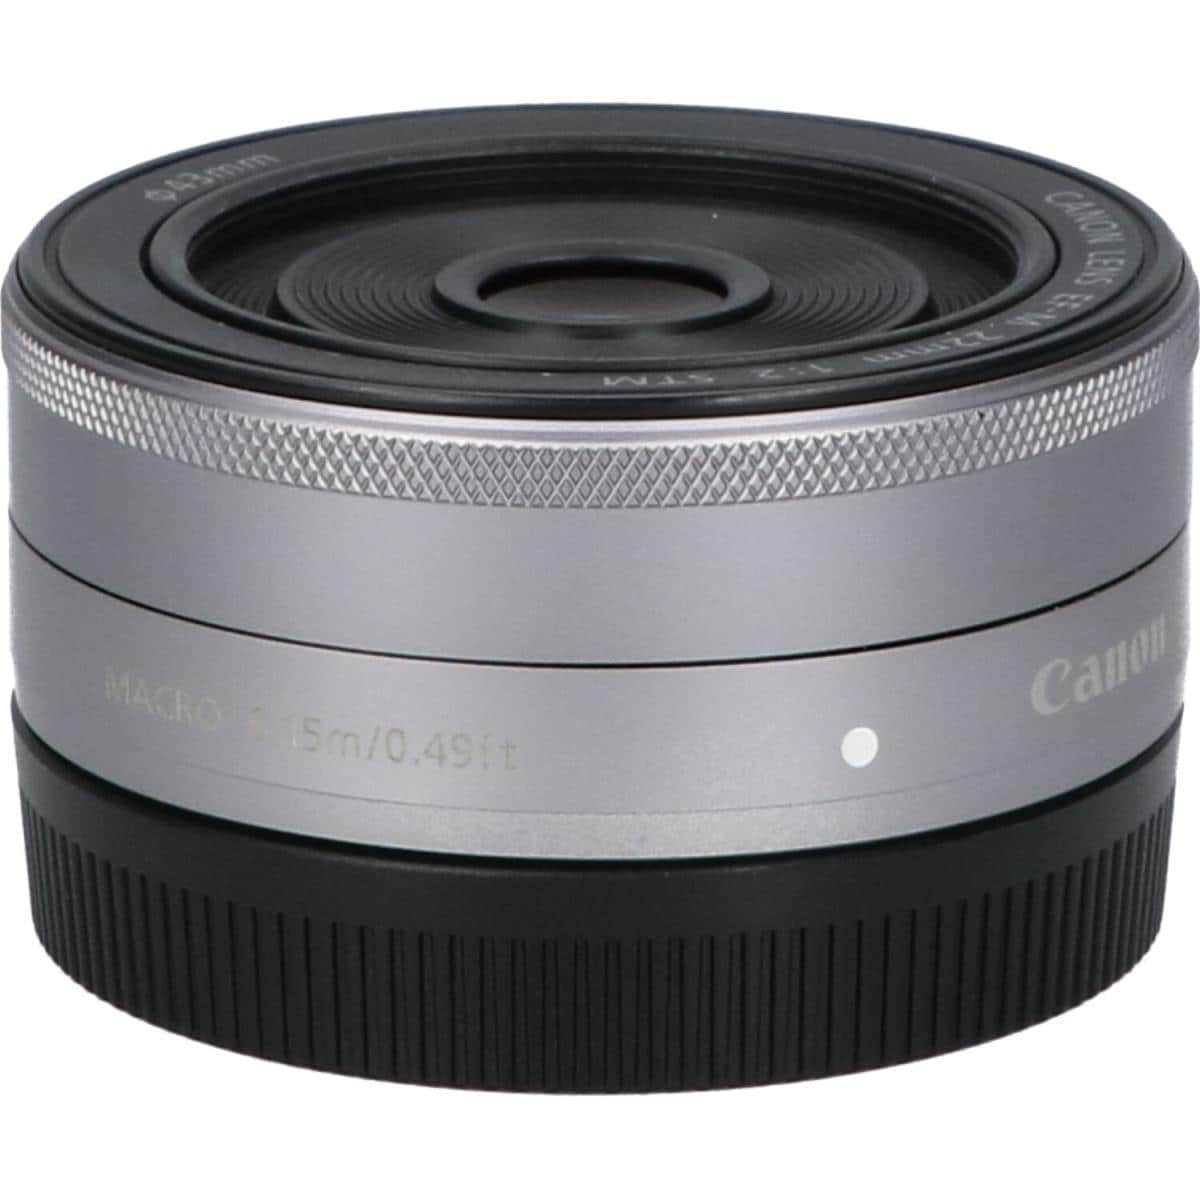 CANON EF-M22mm F2STM SILVER